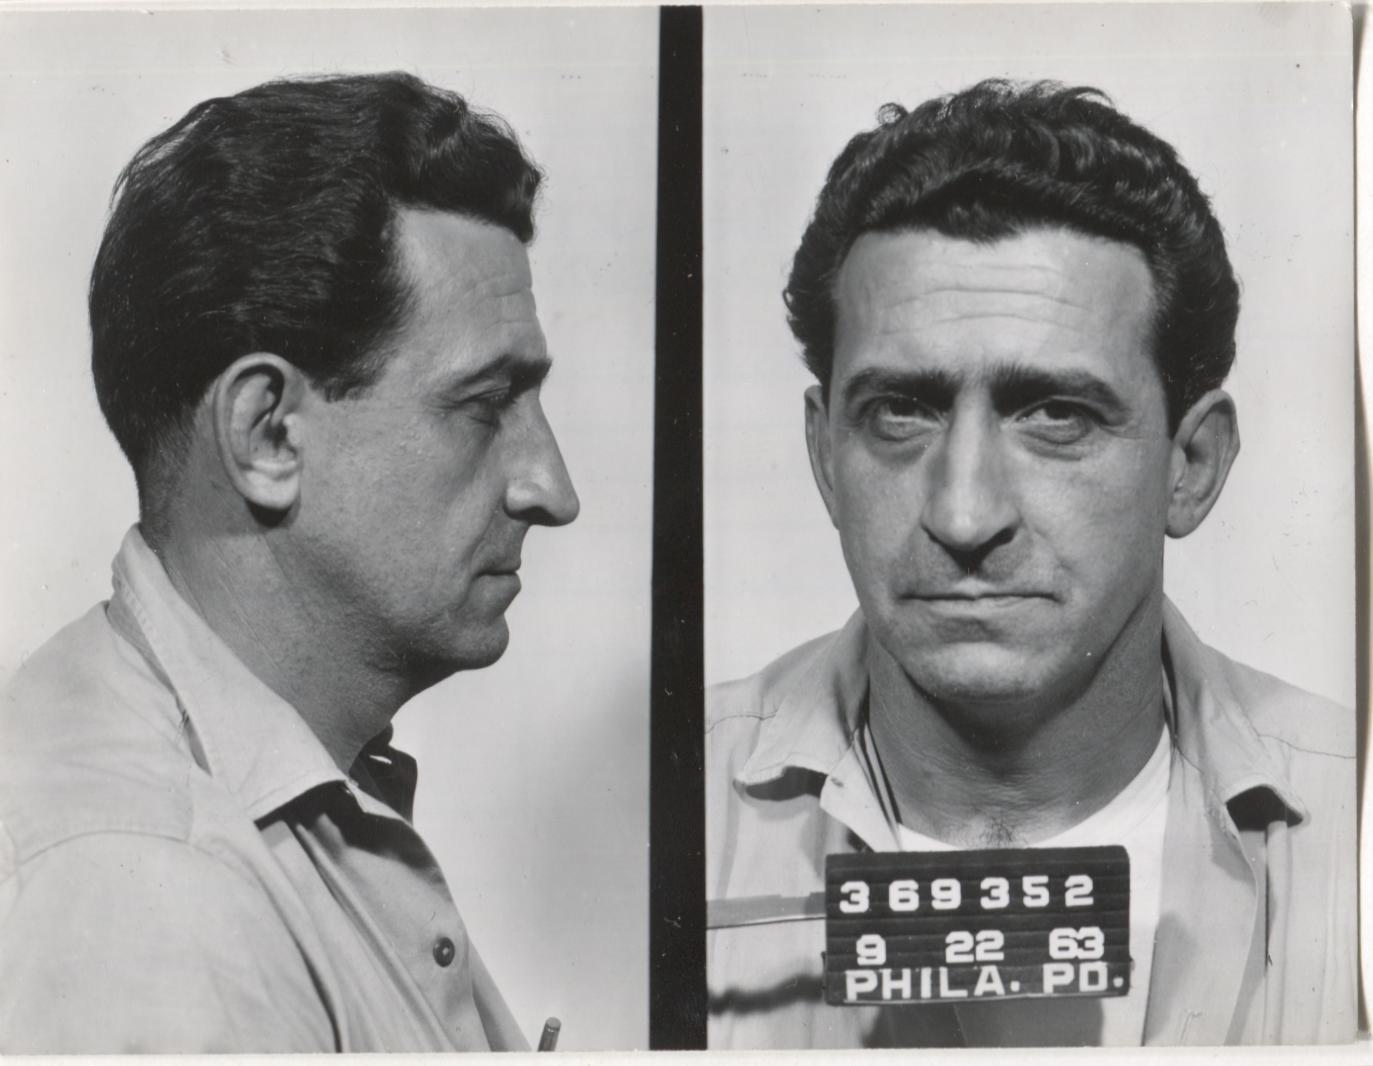 Lawrence J. Baggio Mugshot - Arrested on 9/22/1963 for Frequenting a Gambling House